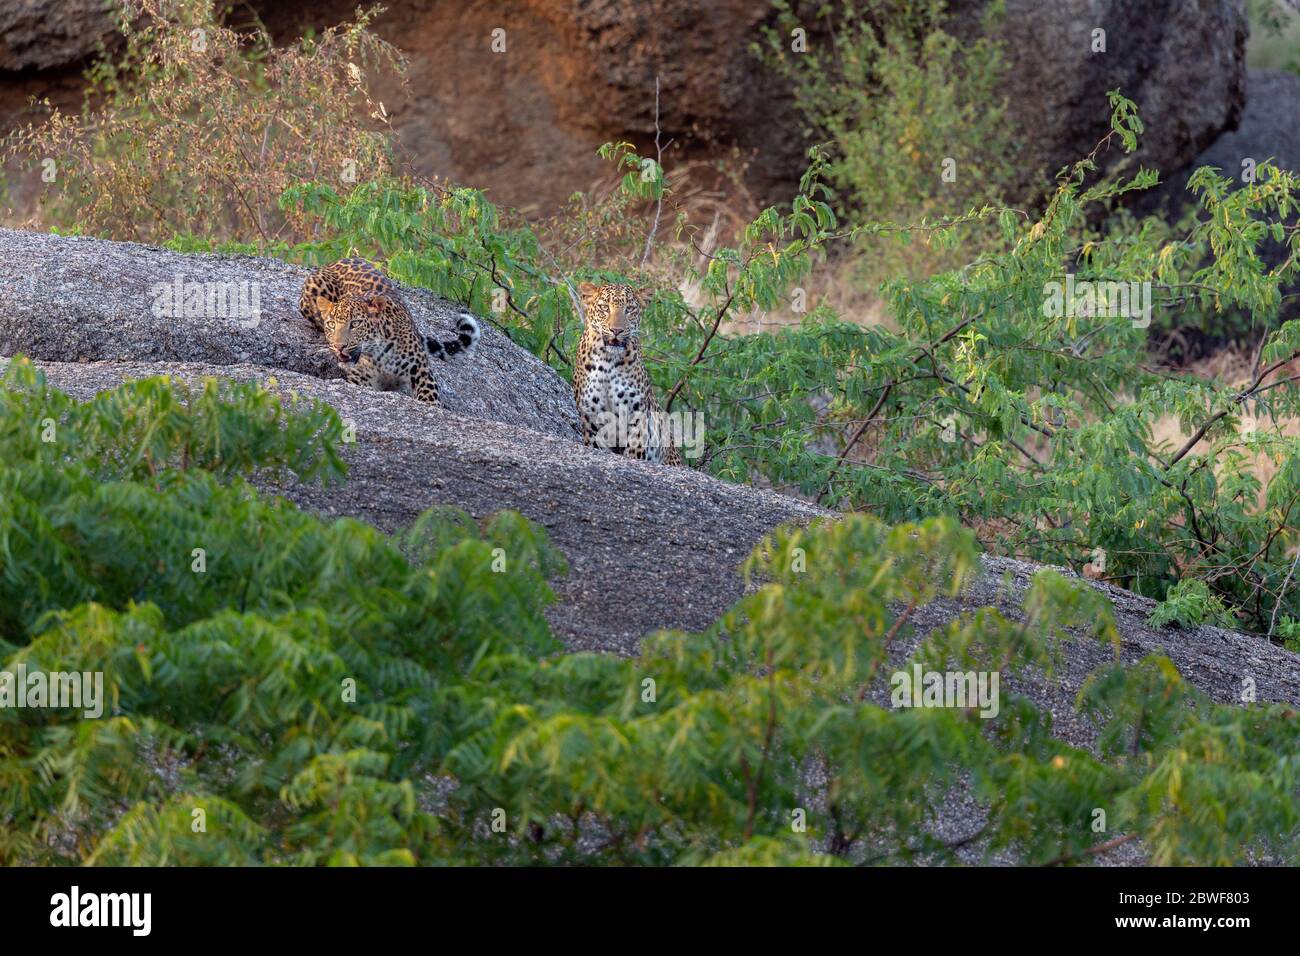 Indian leopard or Panthera pardus fusca in Bera Rajasthan, India Stock Photo